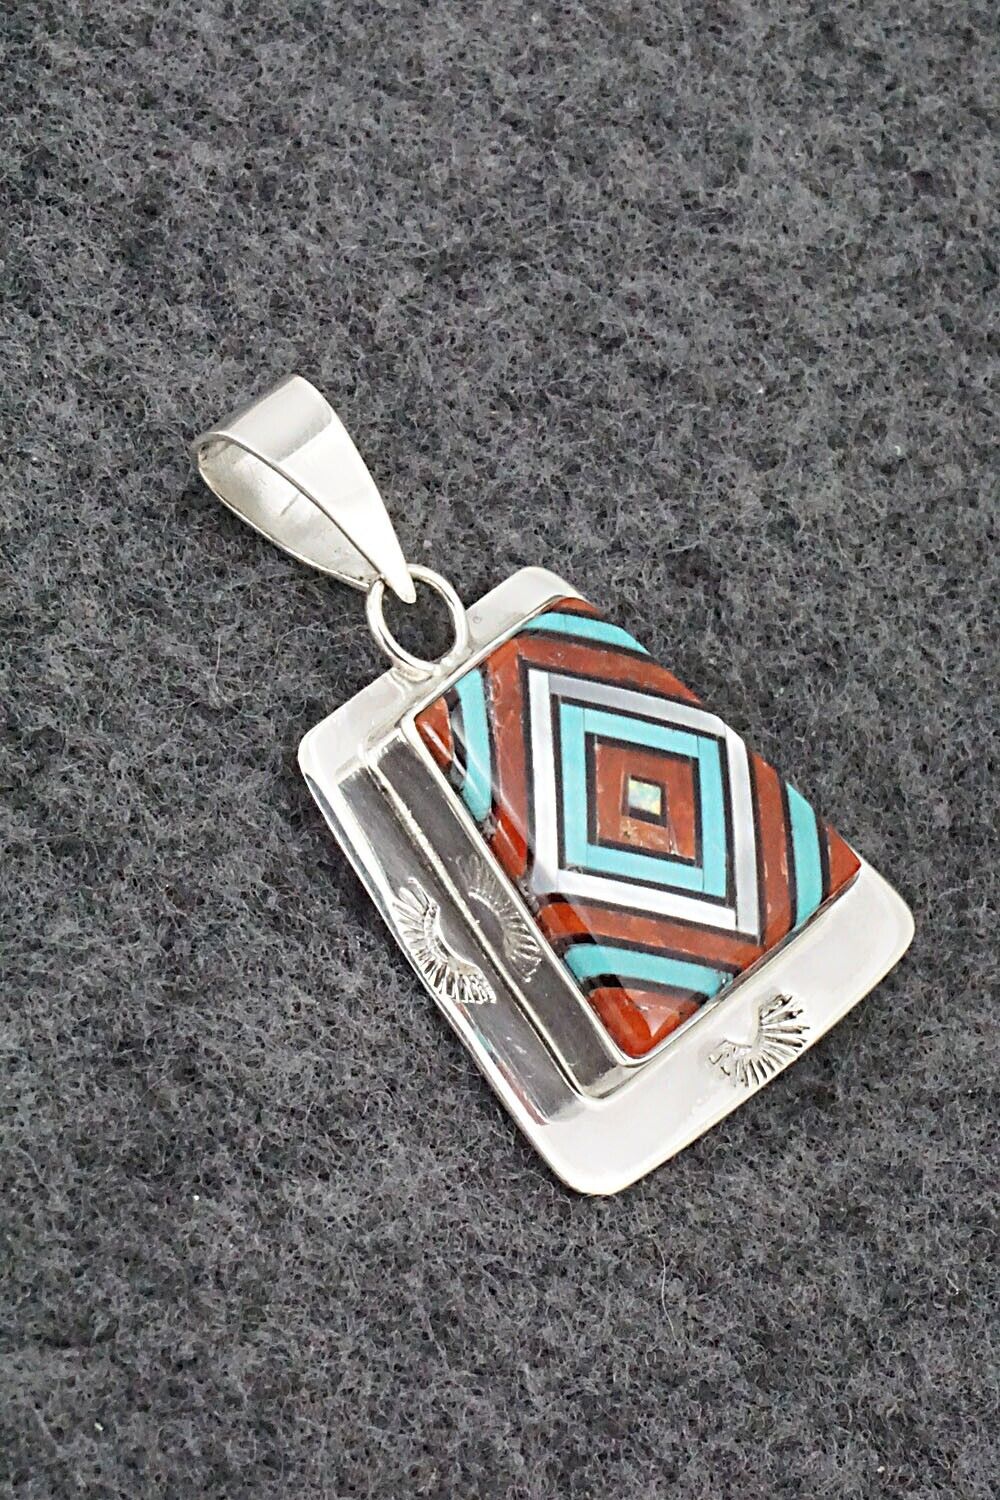 Multi Stone & Sterling Silver Inlay Ring and Pendant - Vernon Vacit